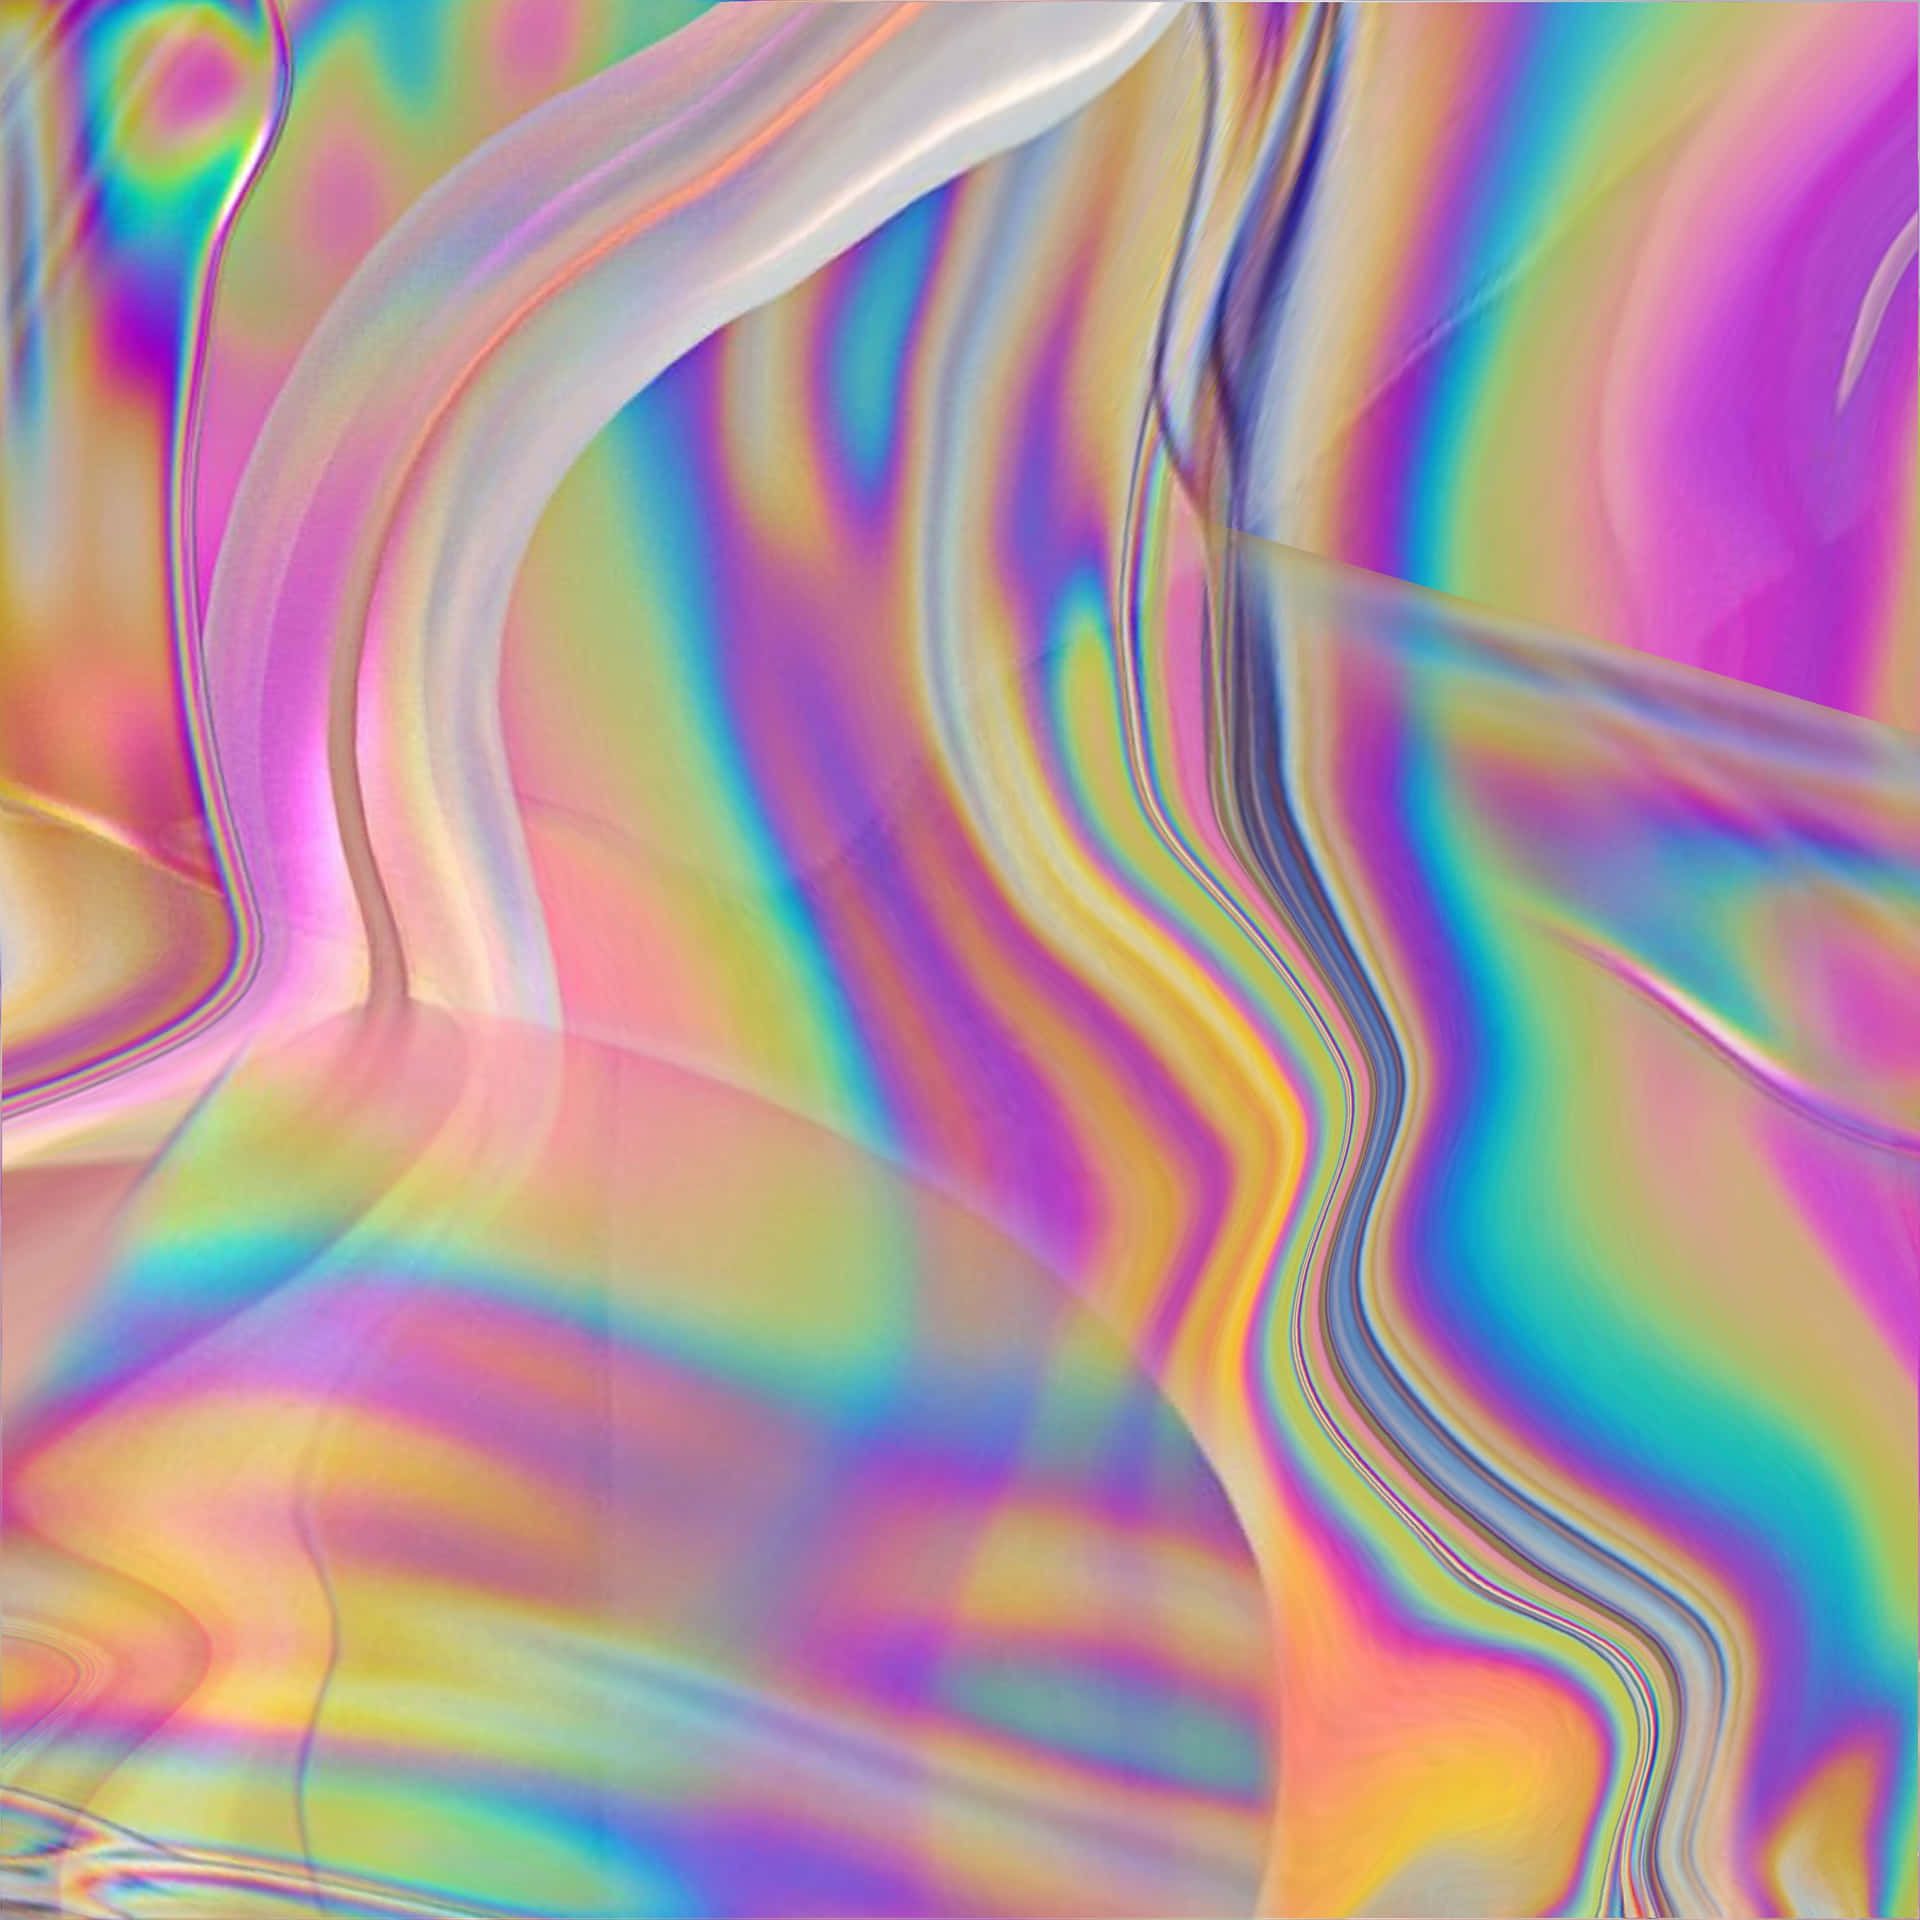 Download A Colorful Abstract Image Of A Rainbow Wallpaper